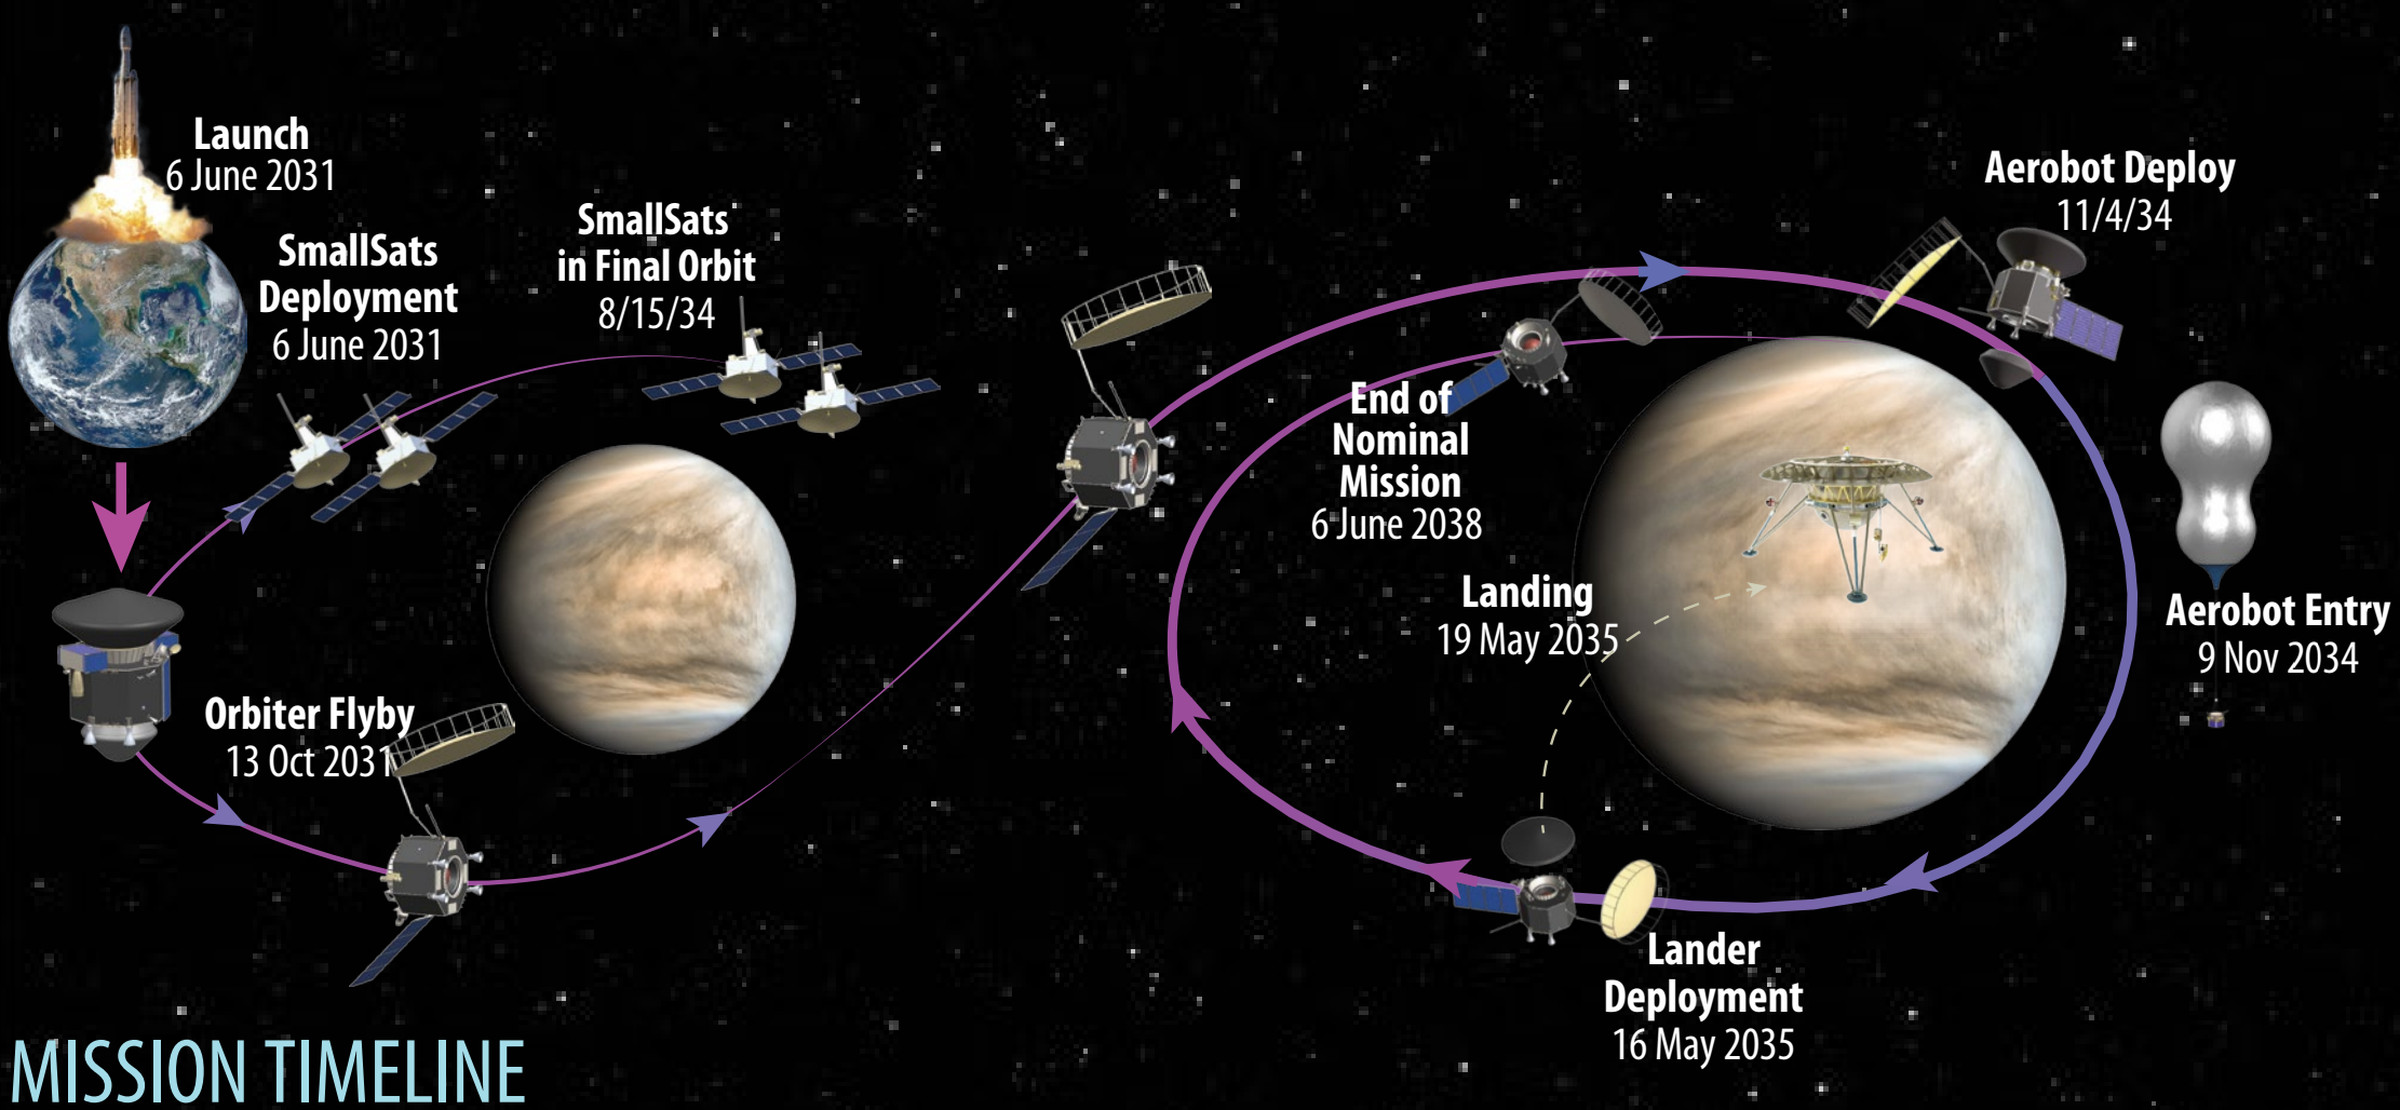 An estimated mission timeline for the Venus flagship mission study, led by Gilmore.